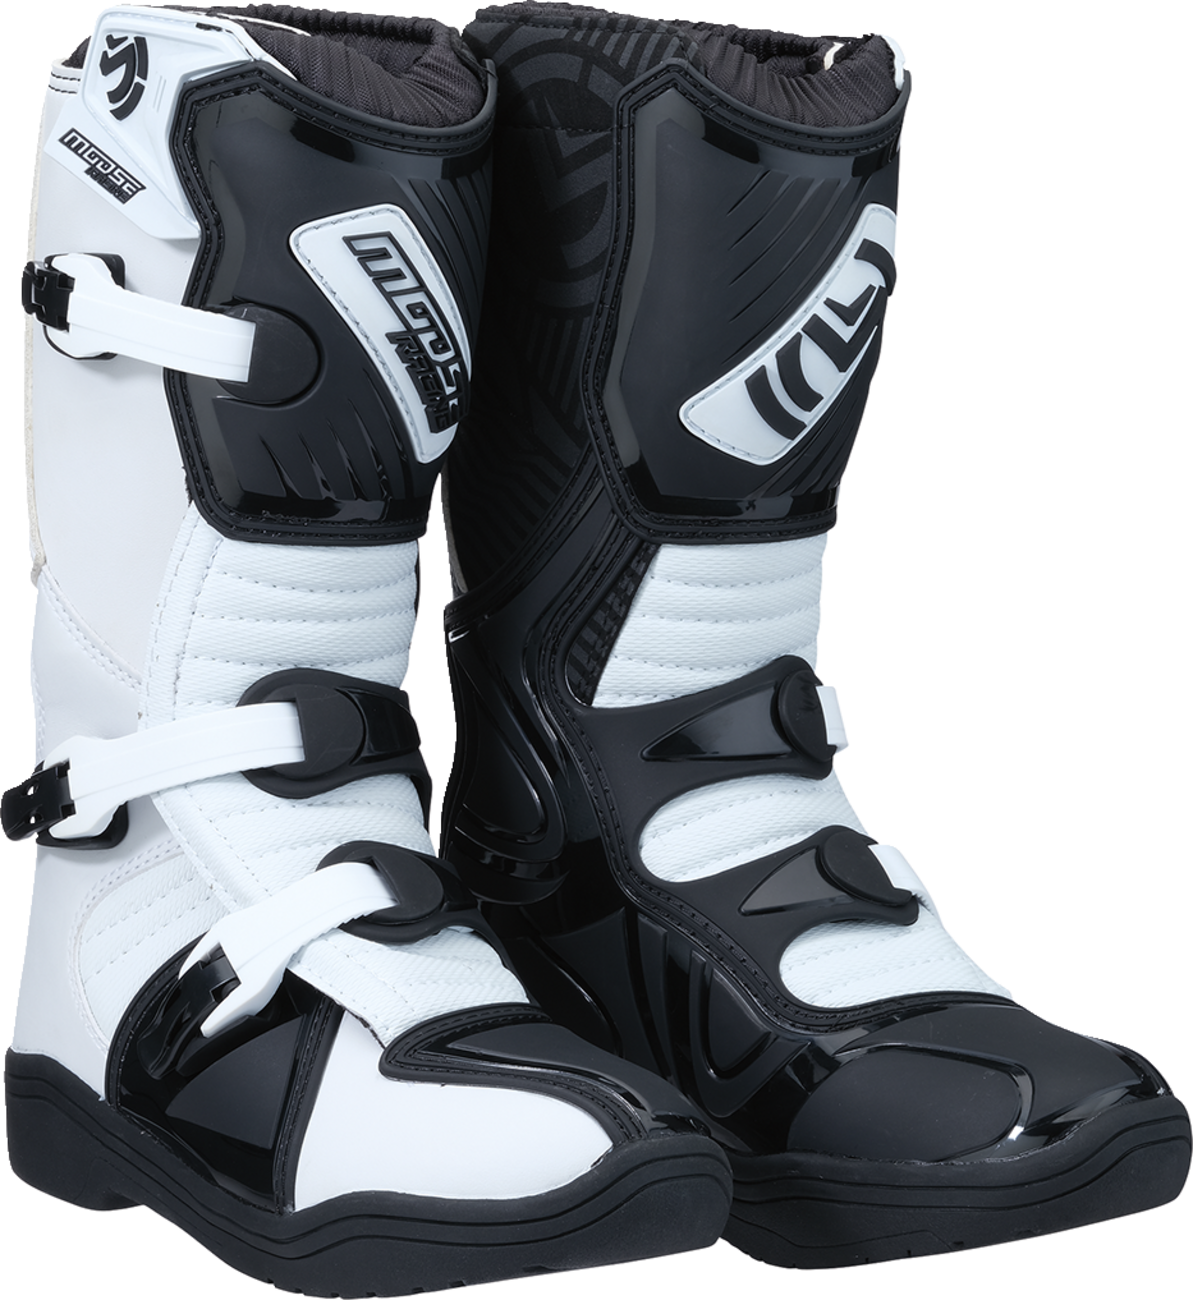 MOOSE RACING M1.3 Boots - Black/White - Size 13 3411-0472